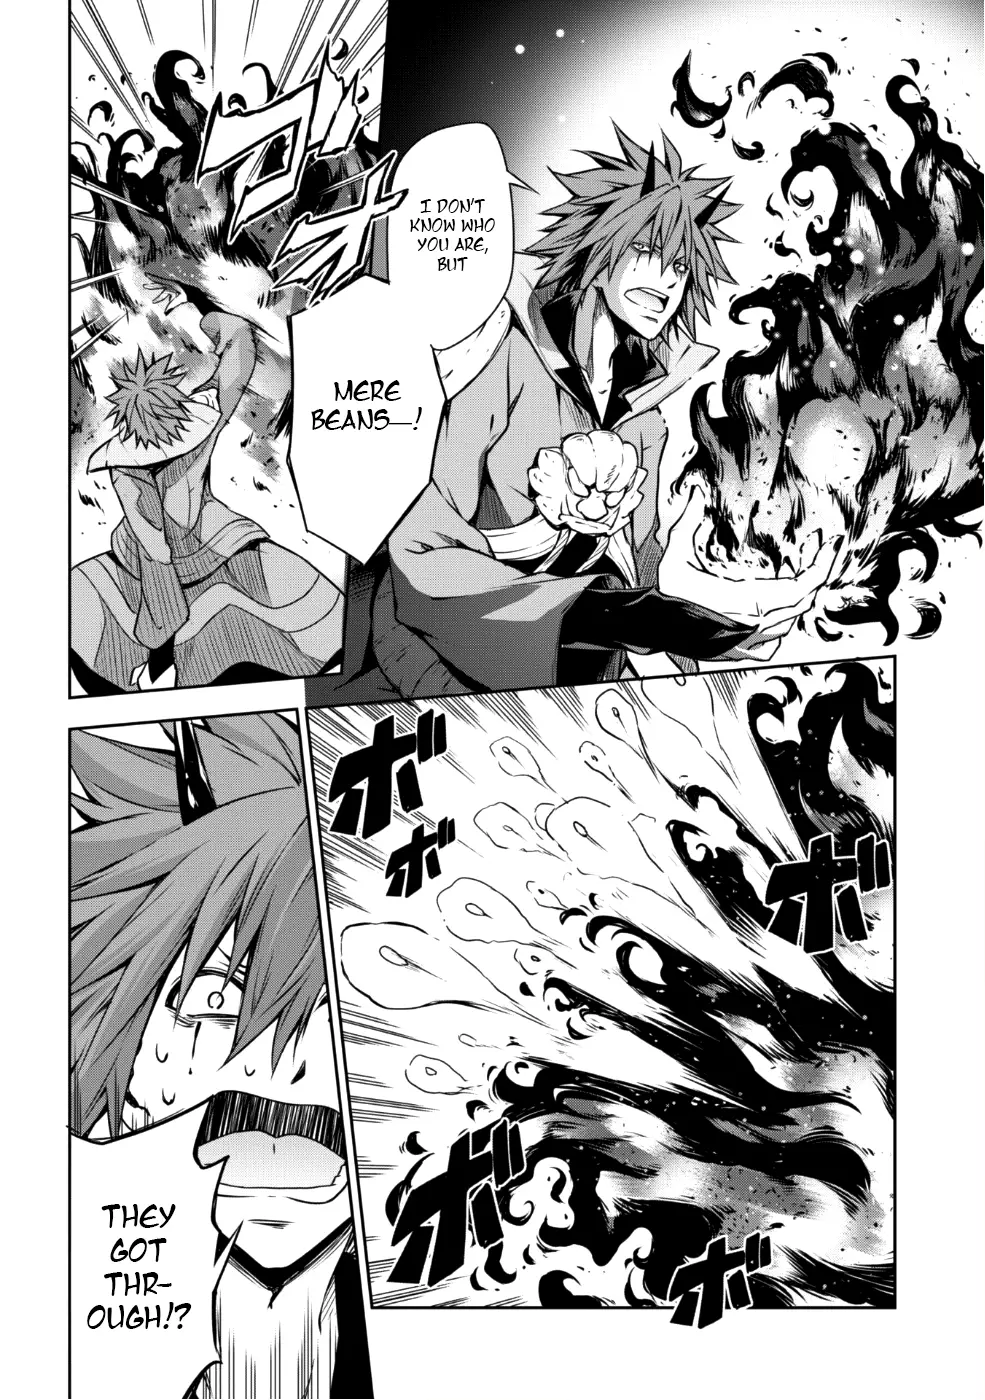 Tensei Shitara Slime Datta Ken: The Ways of Strolling in the Demon Country - 31 page 7